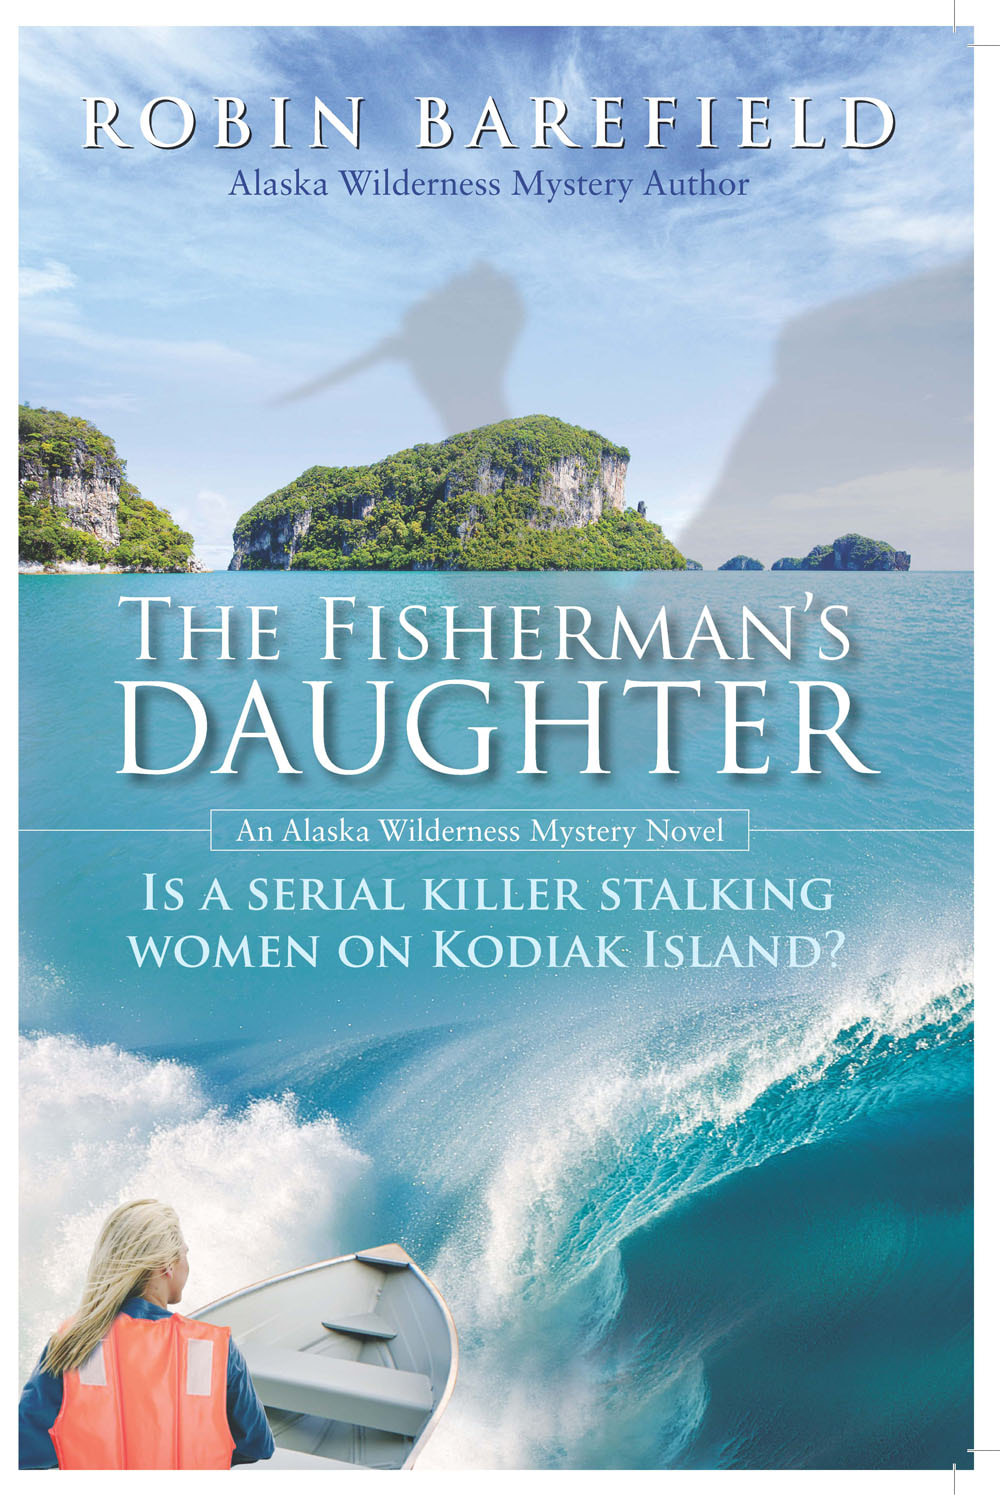 Book: The Fisherman's Daughter by Robin Barefiled